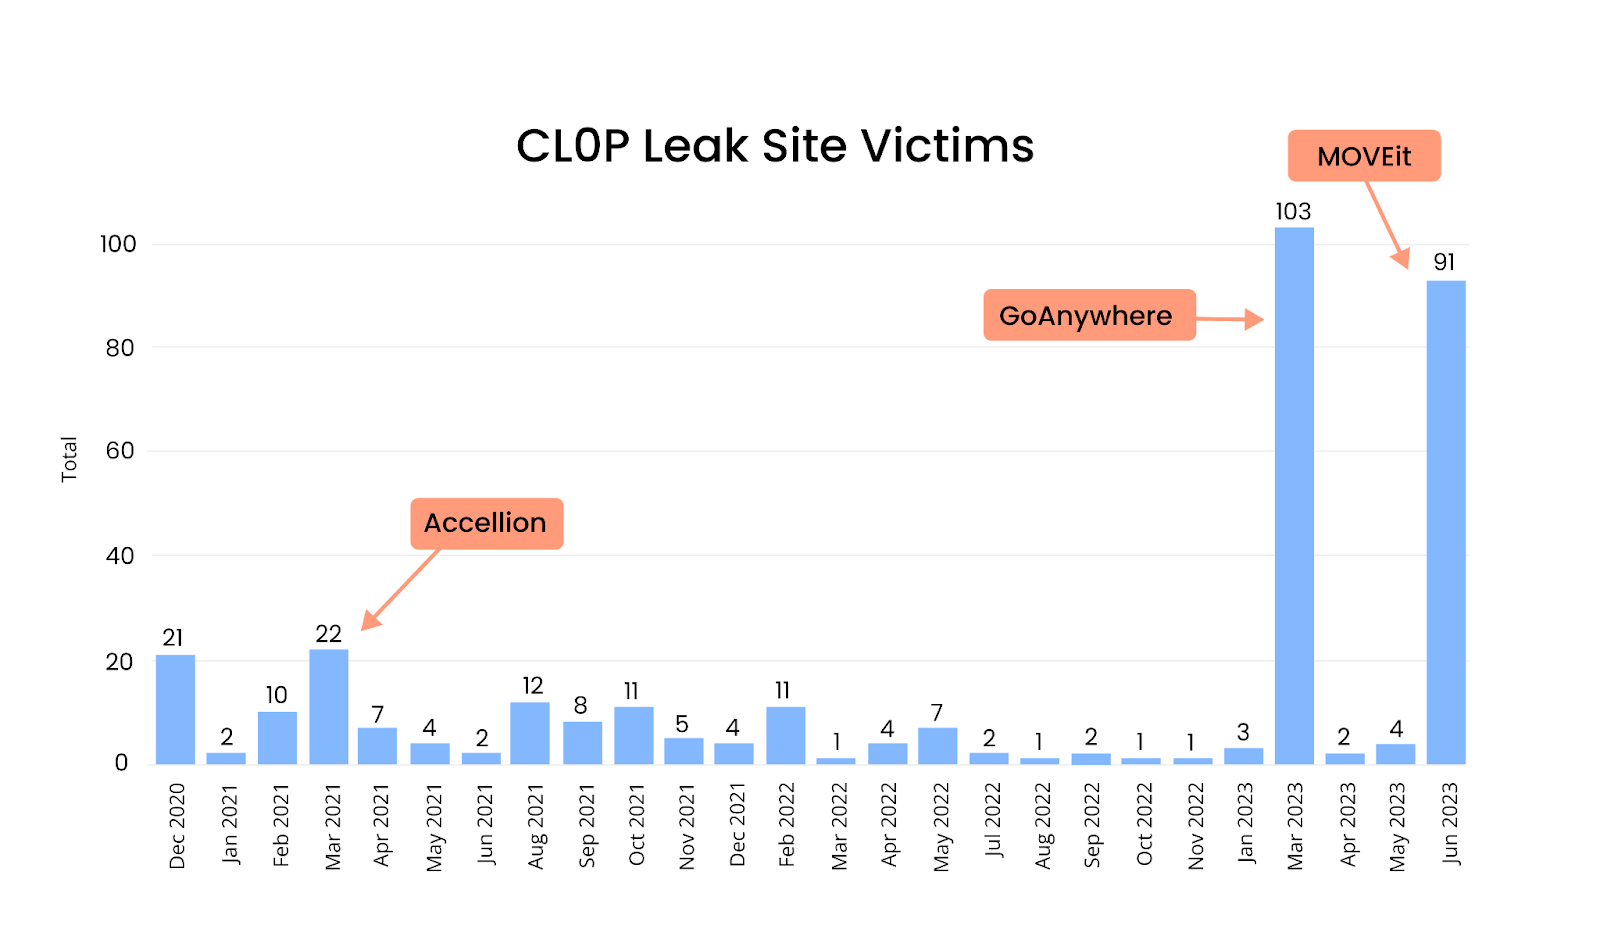 [BAR GRAPH] CL0P Leak Site Victims from December 2020 - June 2023